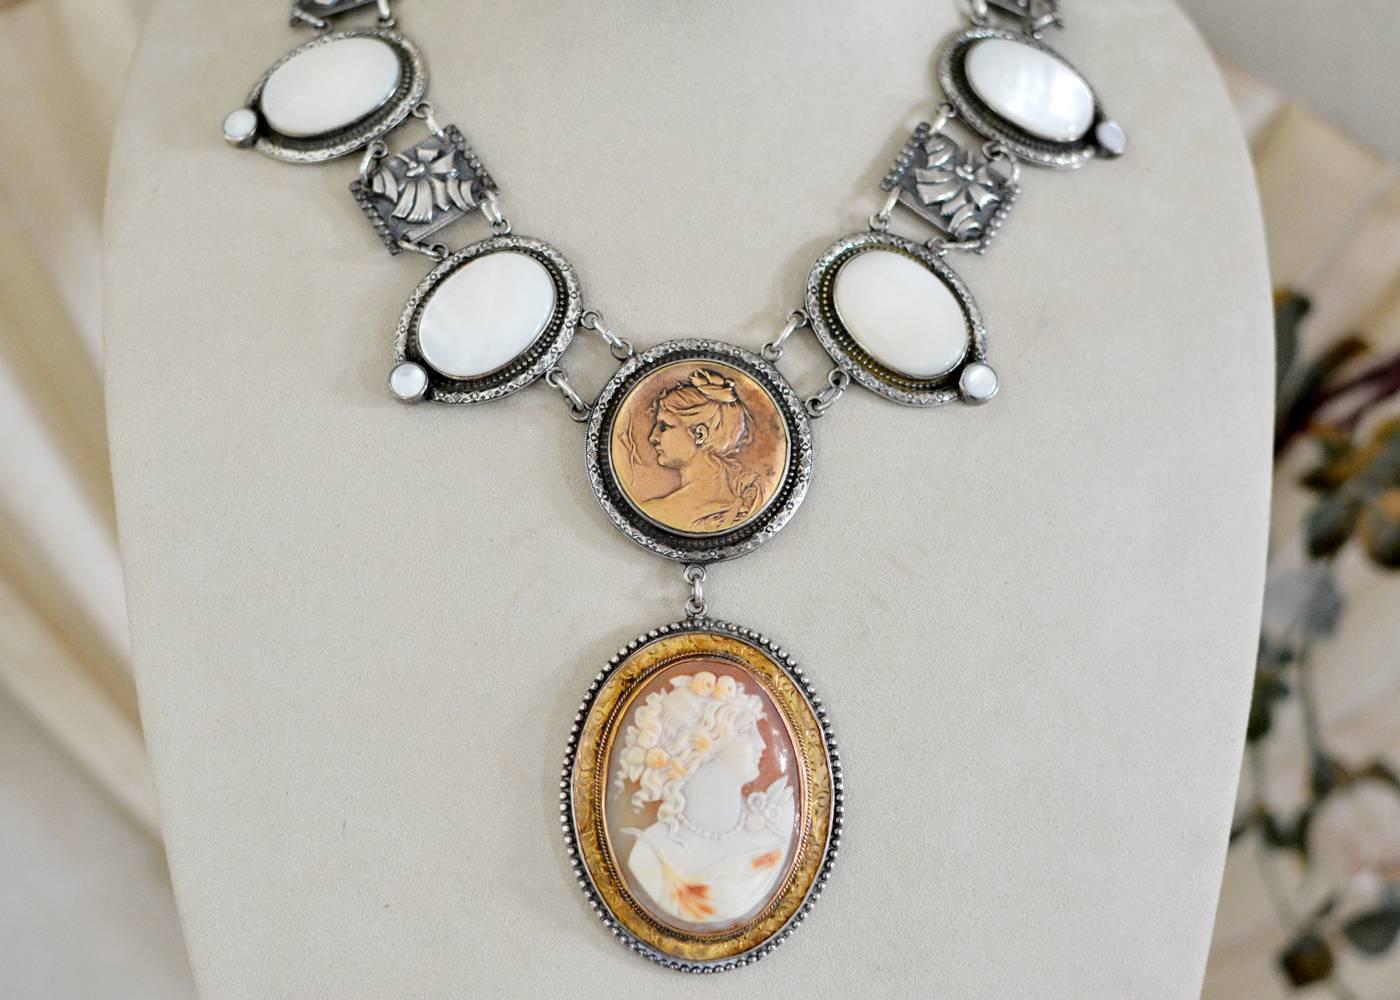 An important one of a kind antique Victorian hand carved Goddess cameo in 14 karat gold engraved mounting is bezel set within beading to gracefully hang from a round vintage French bronze metal. These central elements form the focal point of this